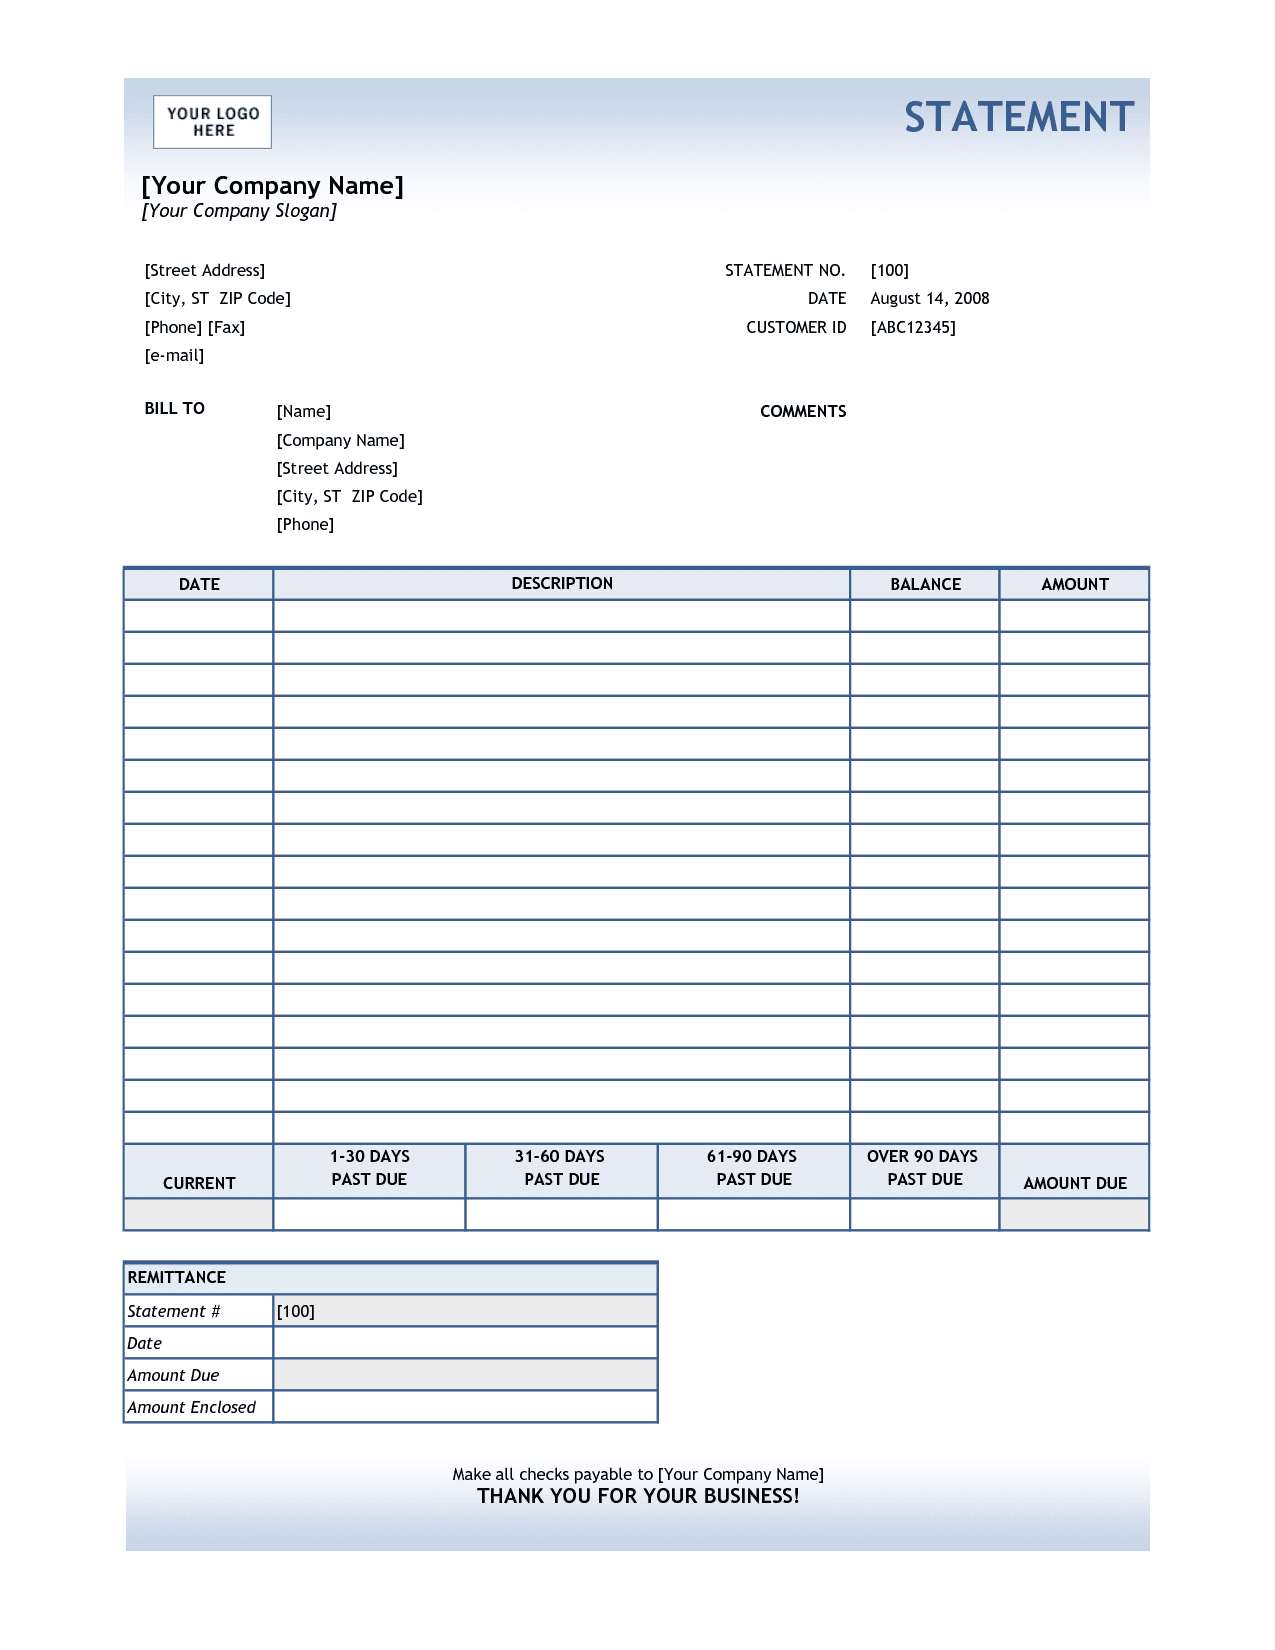 Example Of A Medical Billing Statement And Sample Billing Statement For Services Rendered